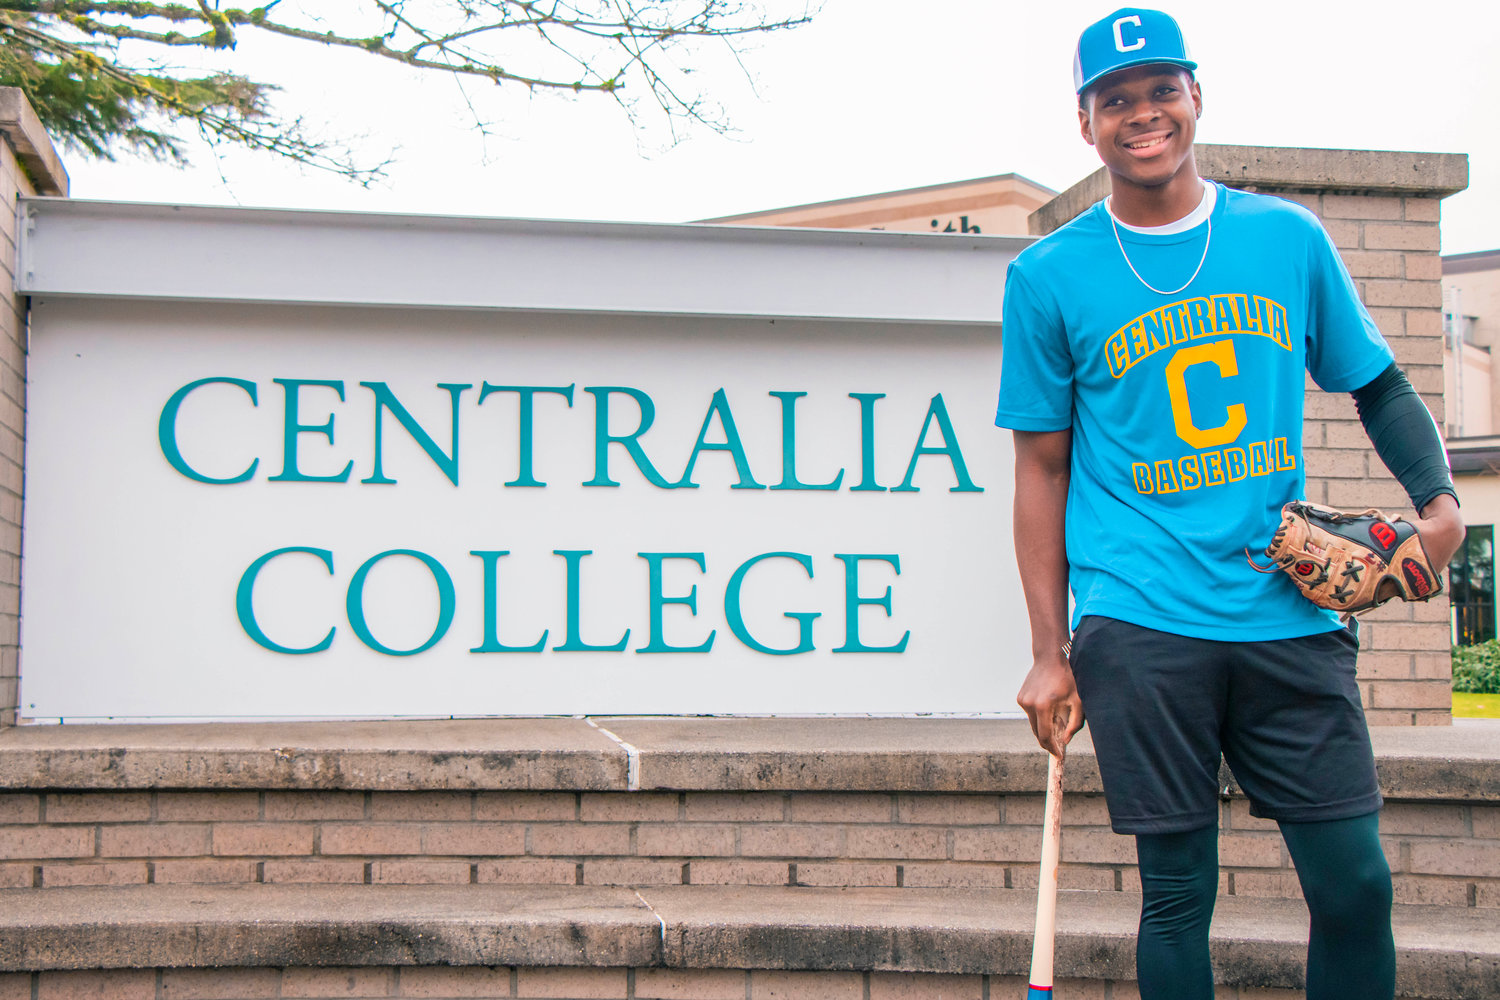 Ferron Moss smiles and poses for a photo Tuesday afternoon at Centralia College.